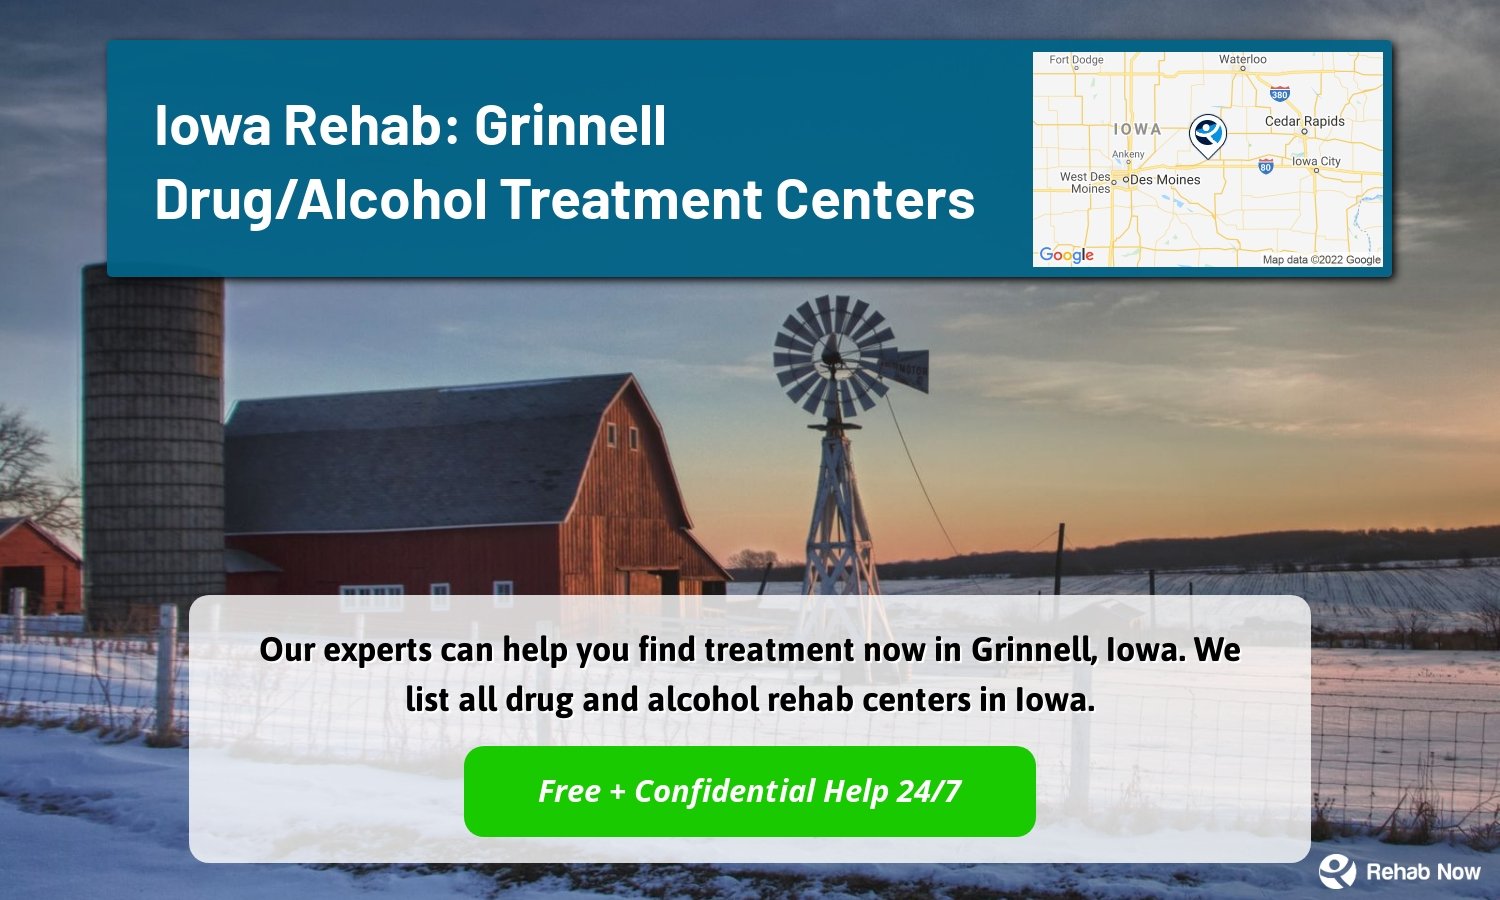 Our experts can help you find treatment now in Grinnell, Iowa. We list all drug and alcohol rehab centers in Iowa.